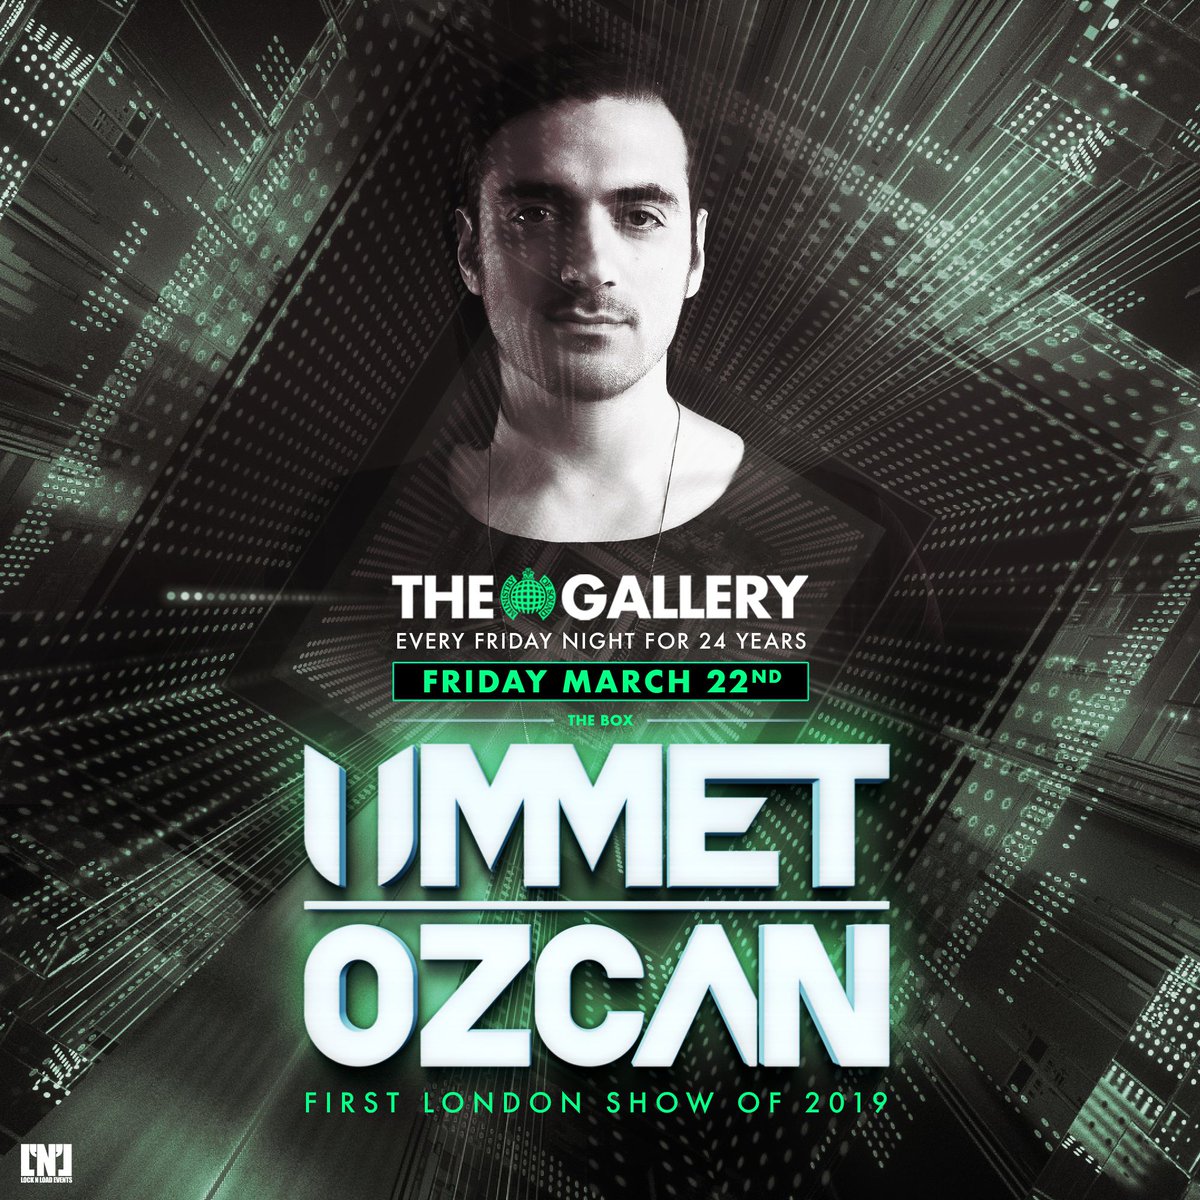 🔥RT @Ministry_Club: Can't wait for this 👇   @thegalleryclub  @UmmetOzcan  Tickets: bit.ly/2TfAAPn https://t.co/lGfkaKa1ak